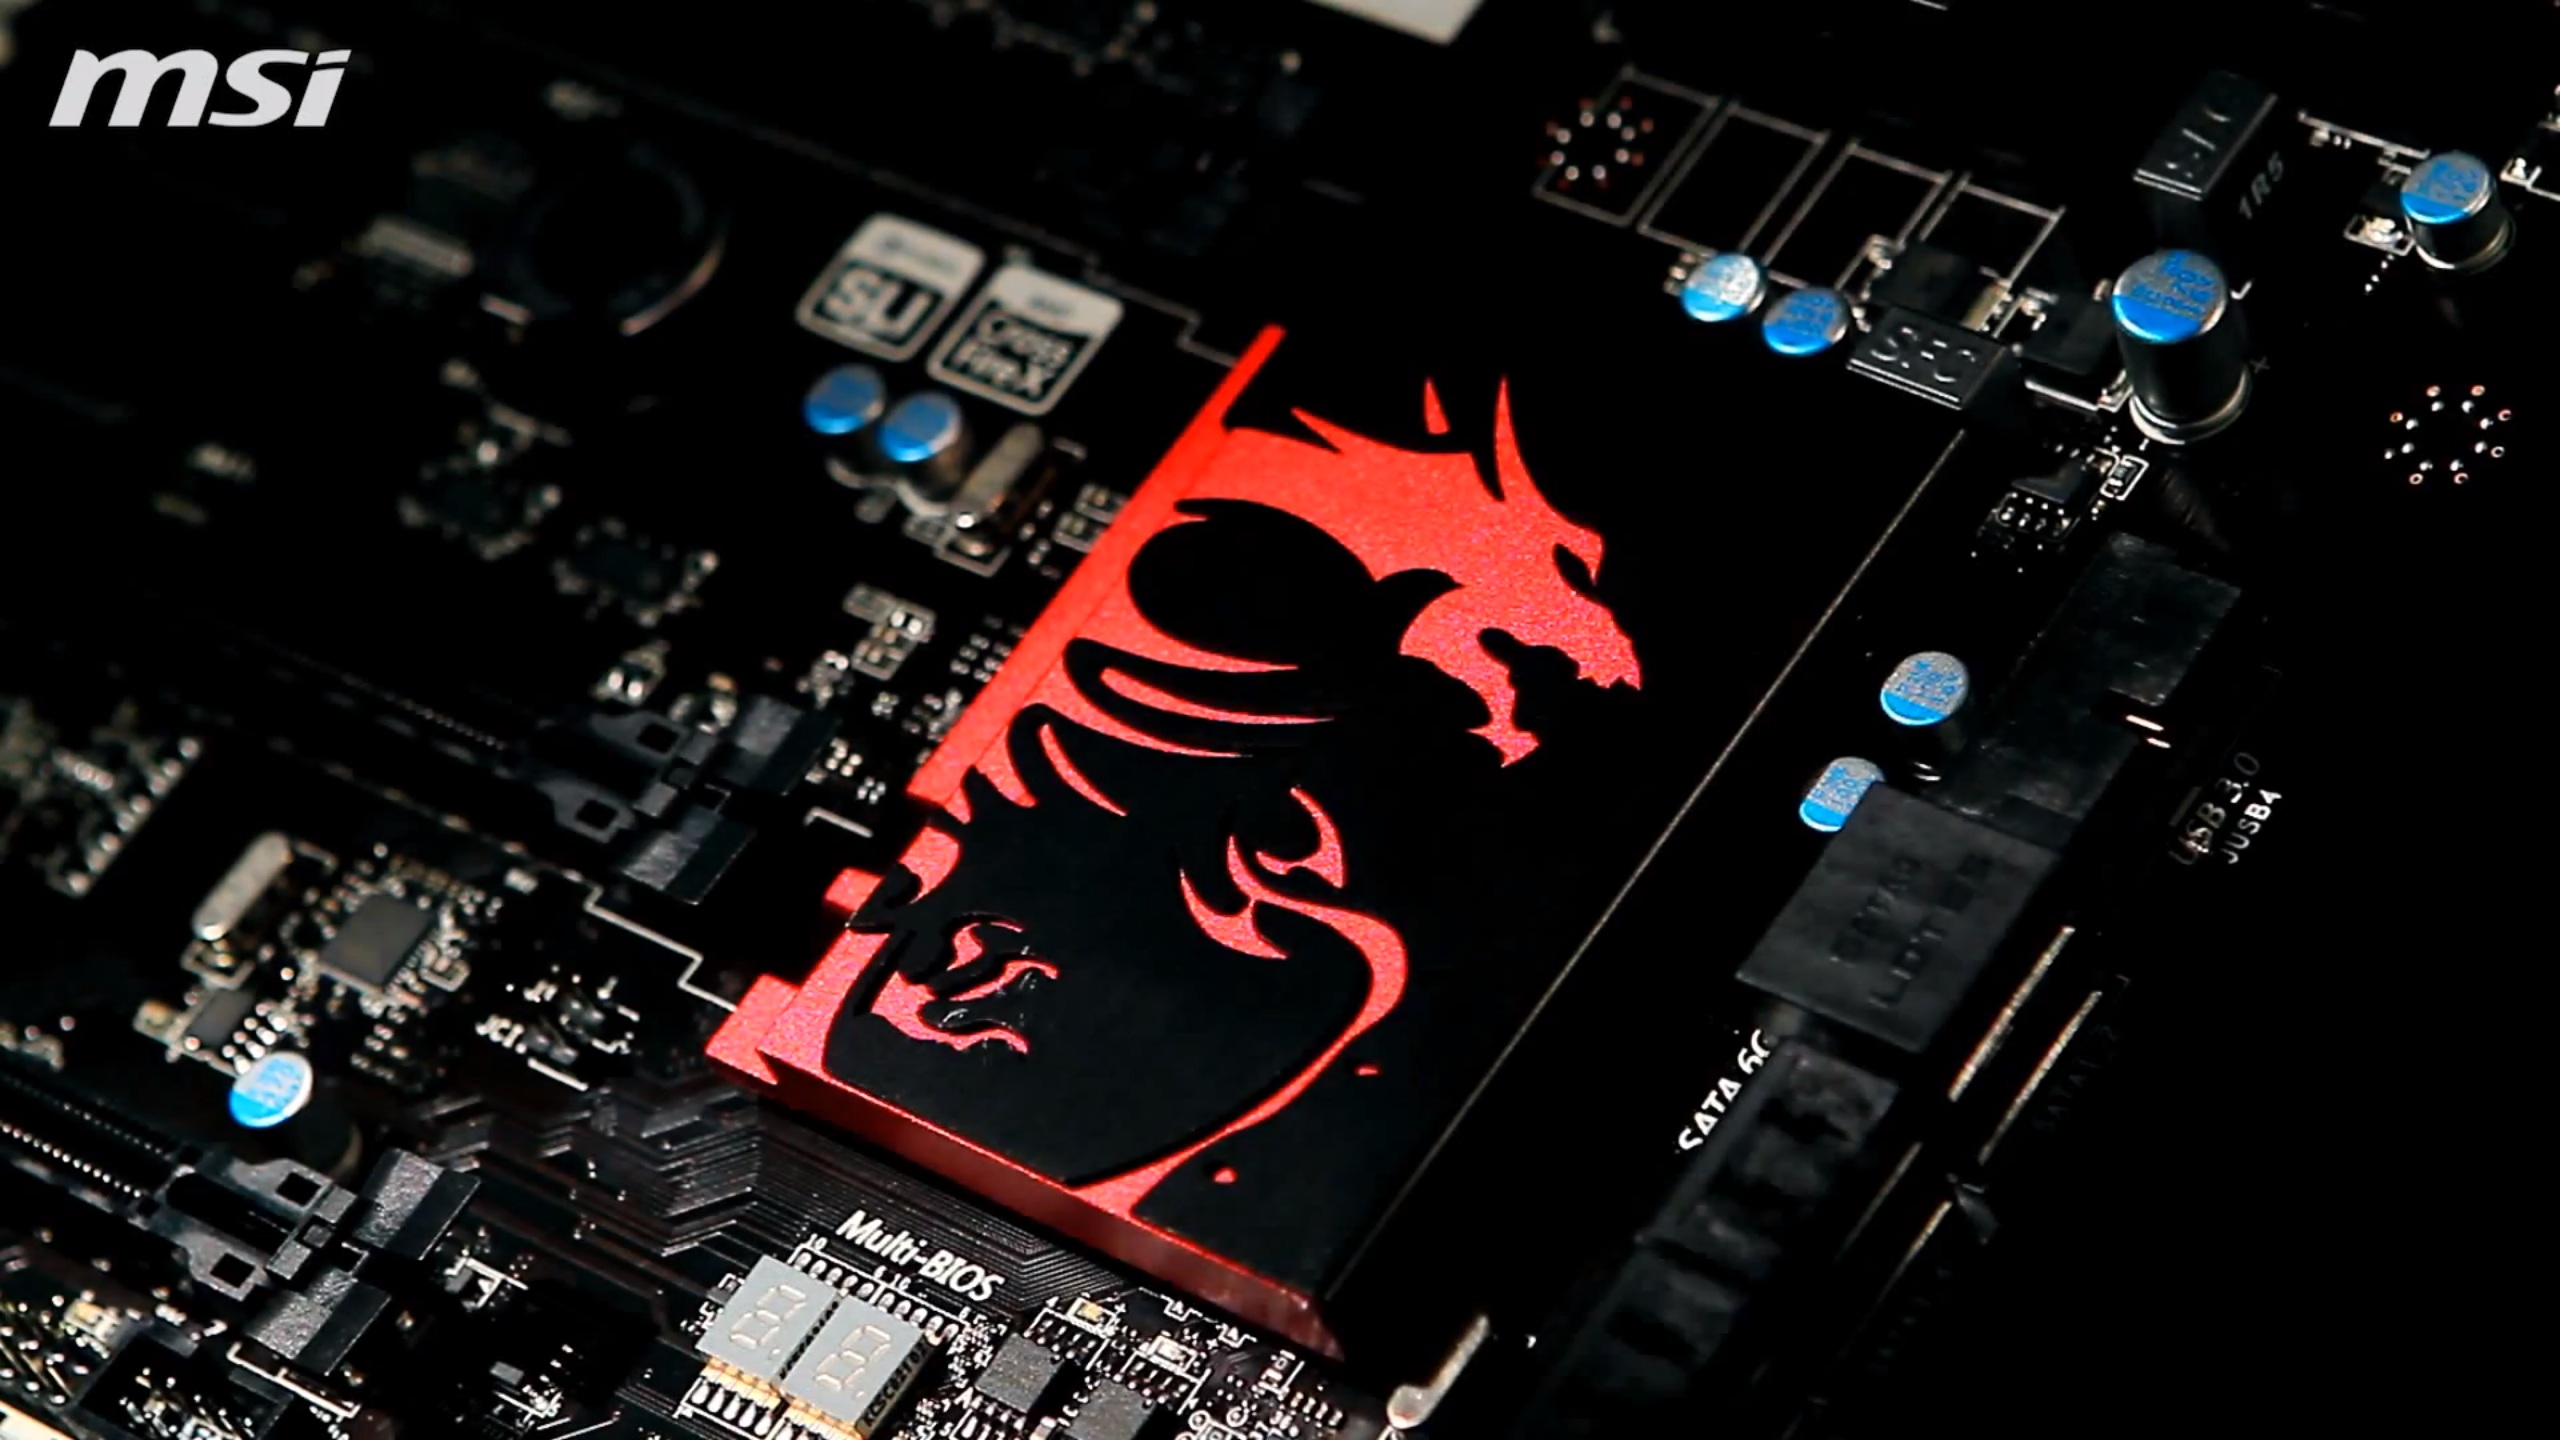 The MSI Z77A GD65 Gaming would be showcased by MSI at CeBIT in all its 2560x1440